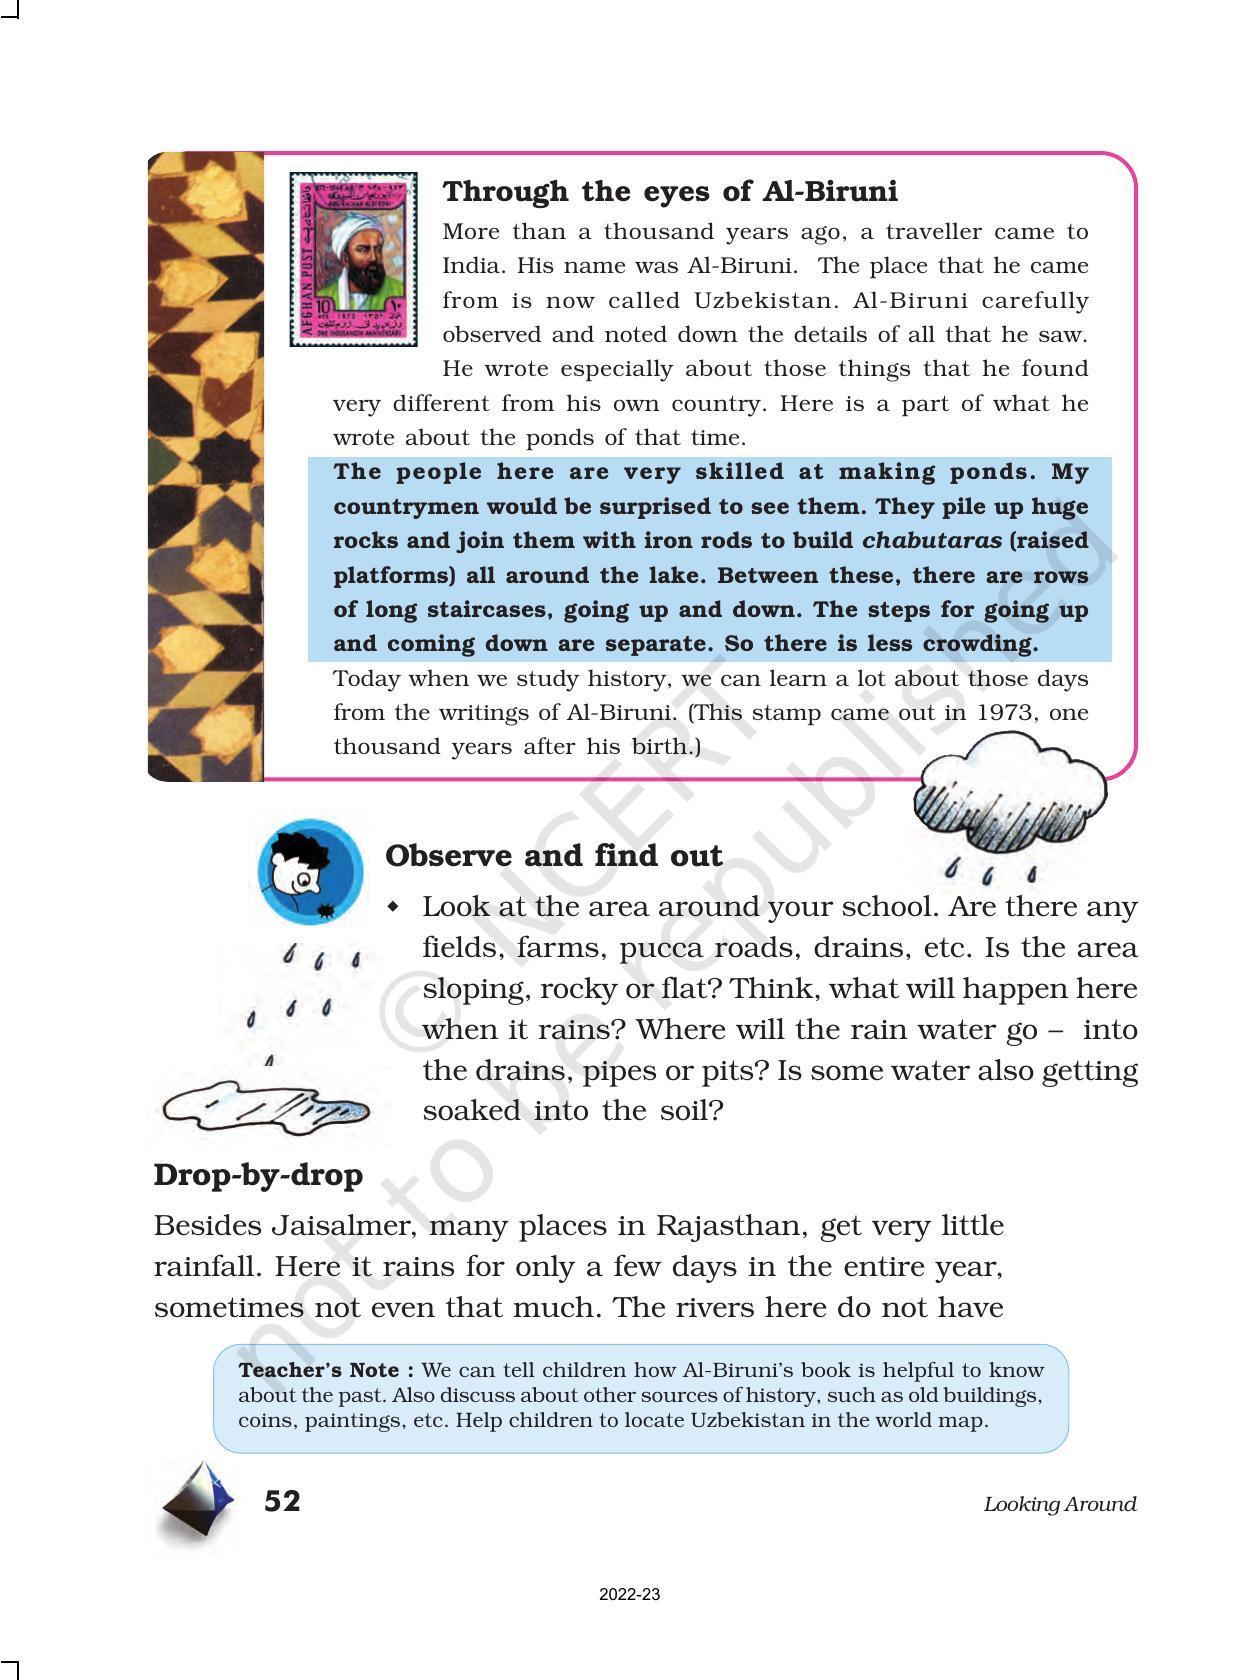 NCERT Book for Class 5 EVS Chapter 6 Every Drop Counts - Page 2